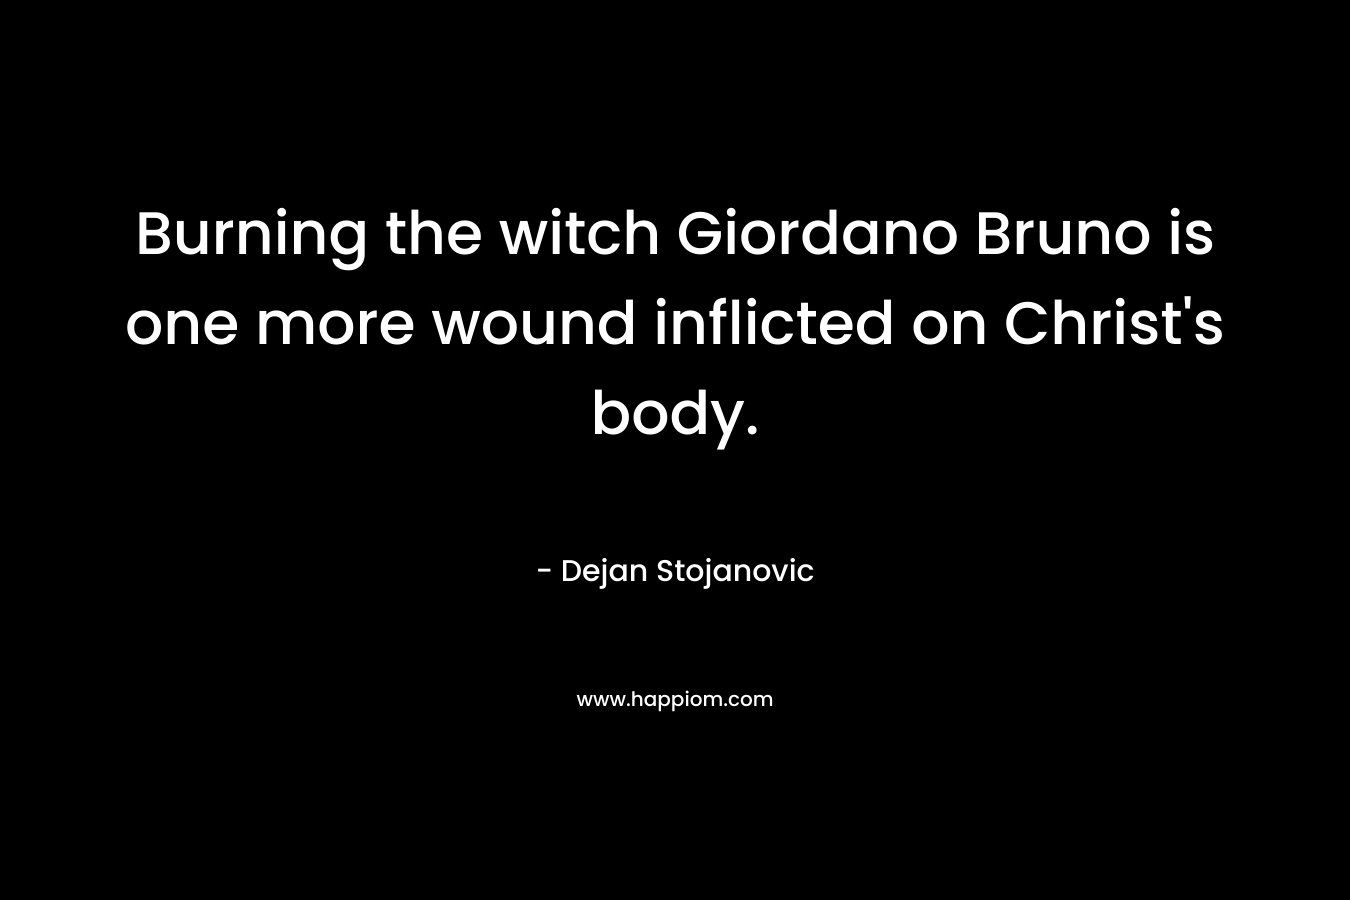 Burning the witch Giordano Bruno is one more wound inflicted on Christ’s body. – Dejan Stojanovic